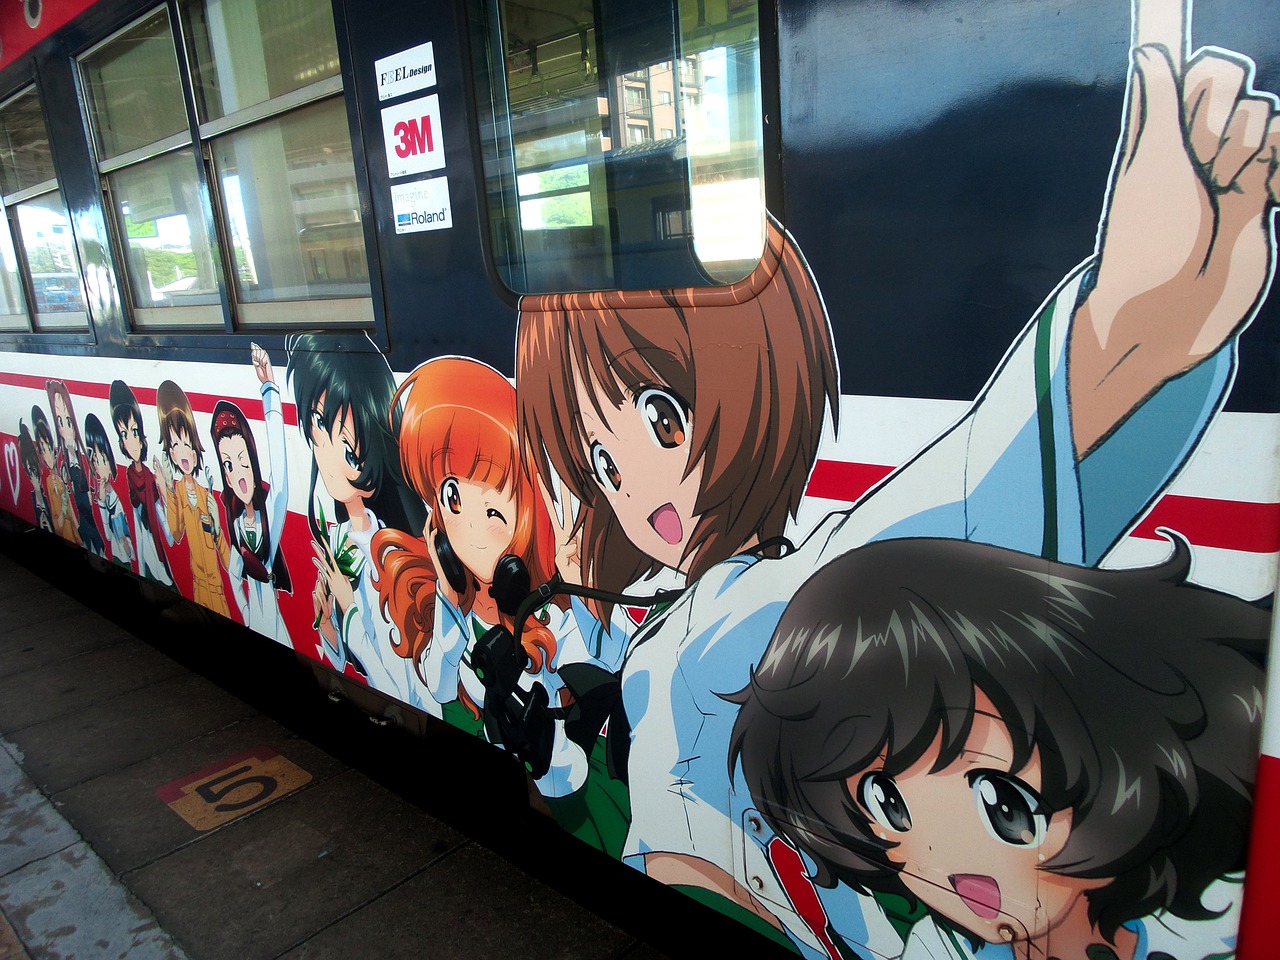 10 Misconceptions About Japanese Culture Anime Perpetuates